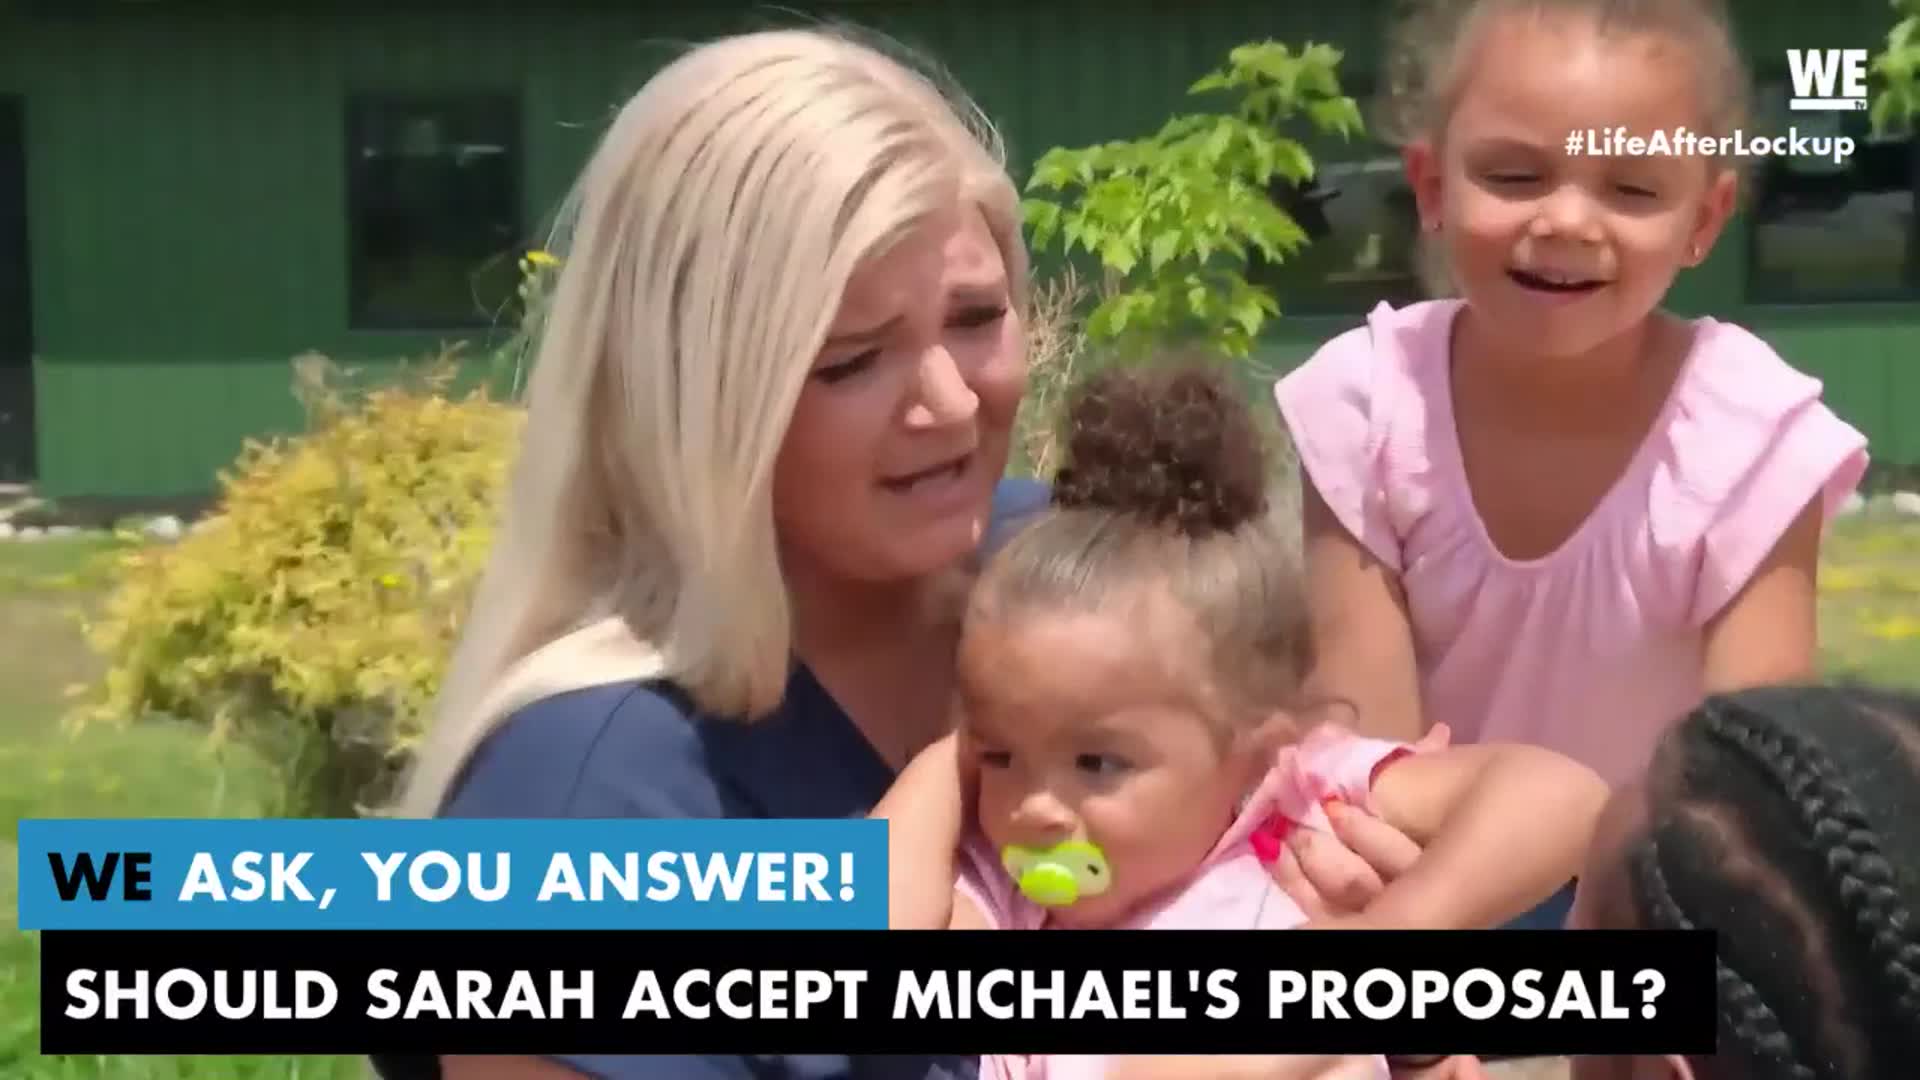 Watch WE Ask, You Answer: Should Sarah Accept Michael's Proposal? | Life After Lockup Video Extras